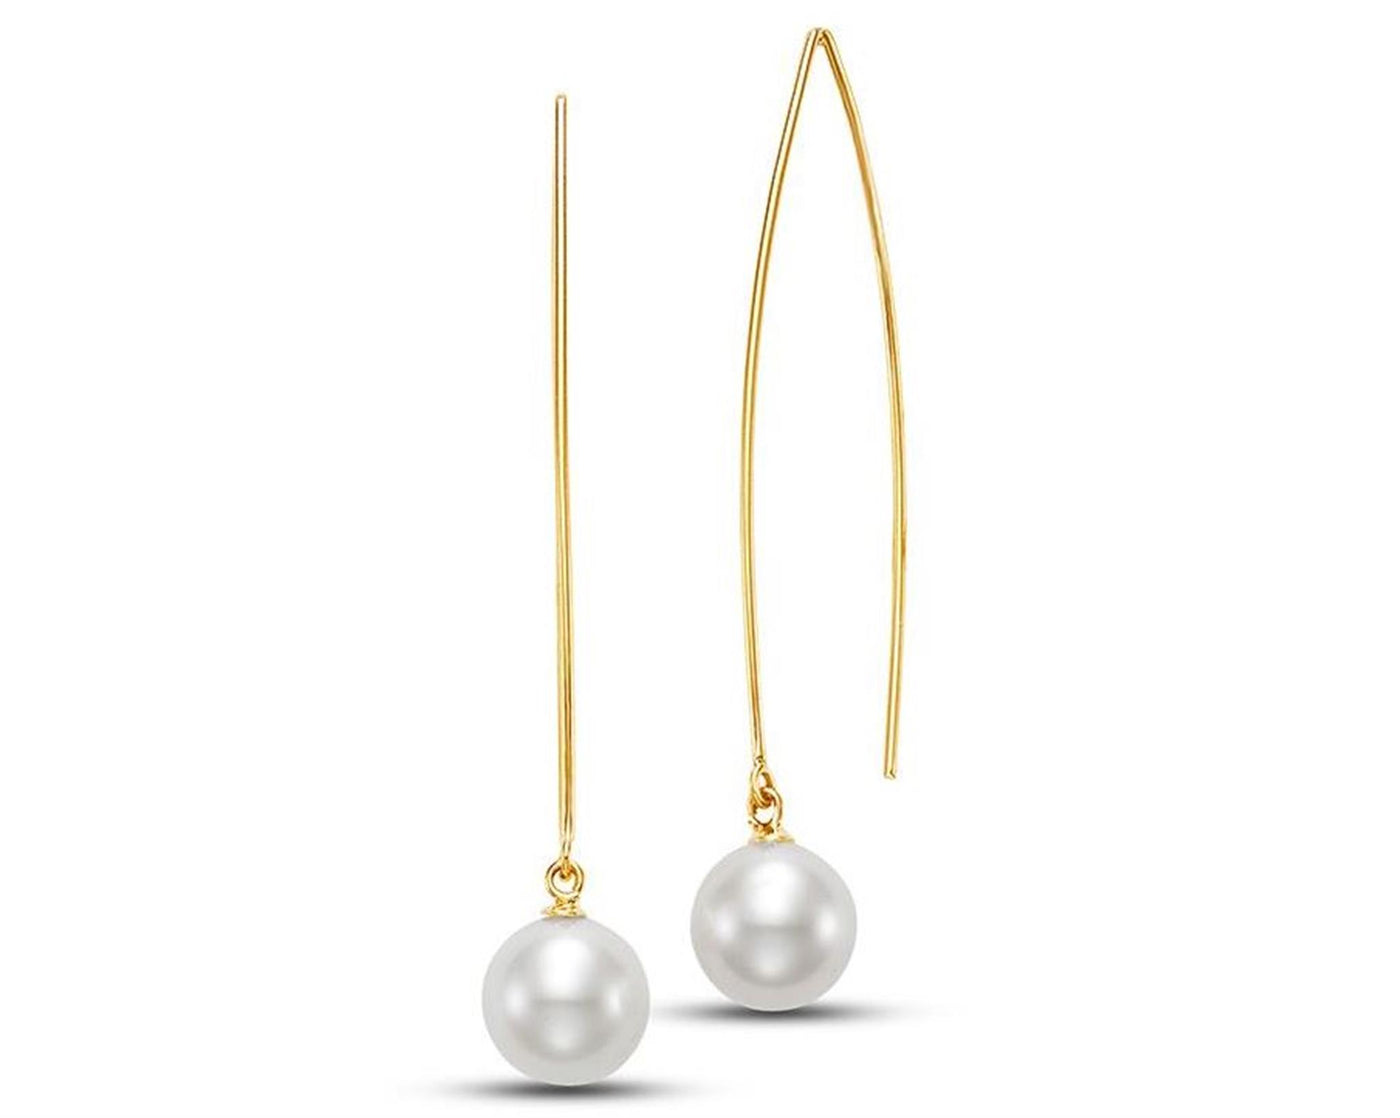 14K Yellow Gold Threader Style Earrings Featuring White Freshwater Pearls